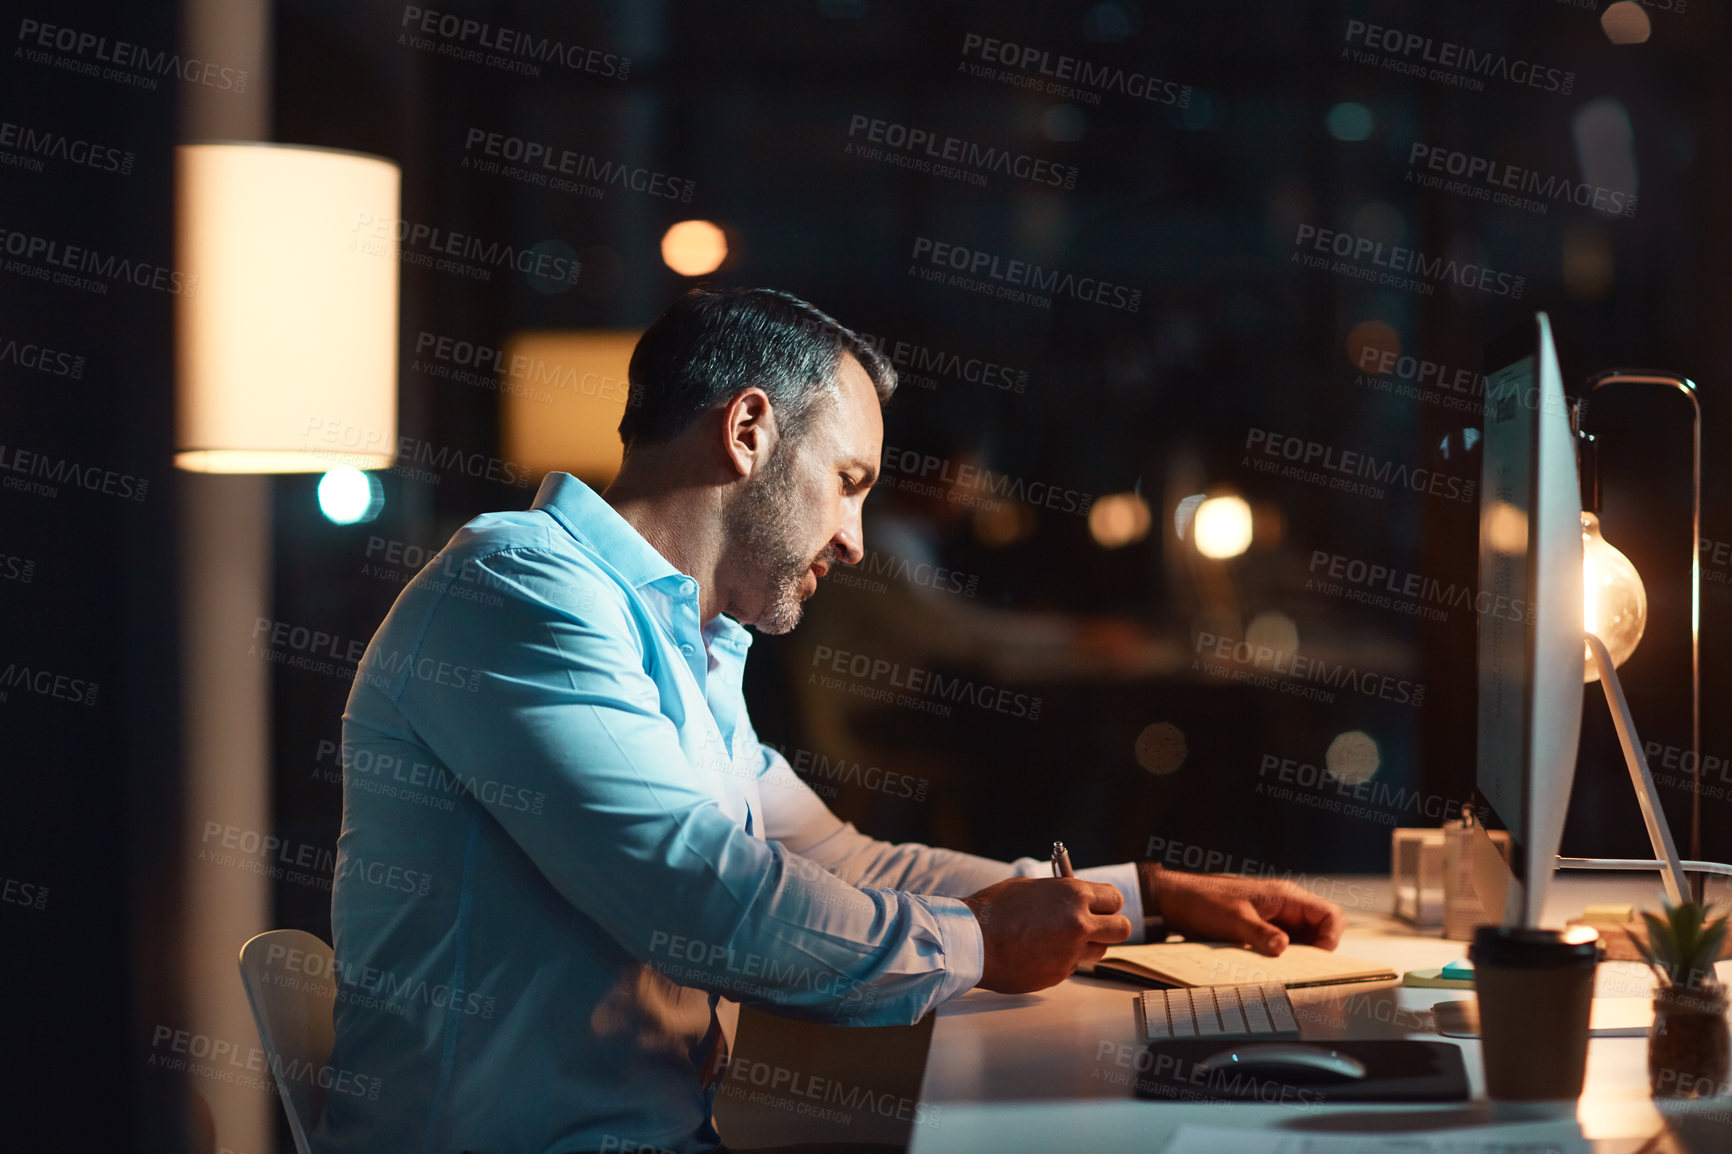 Buy stock photo Shot of a mature businessman using a computer during a late night at work